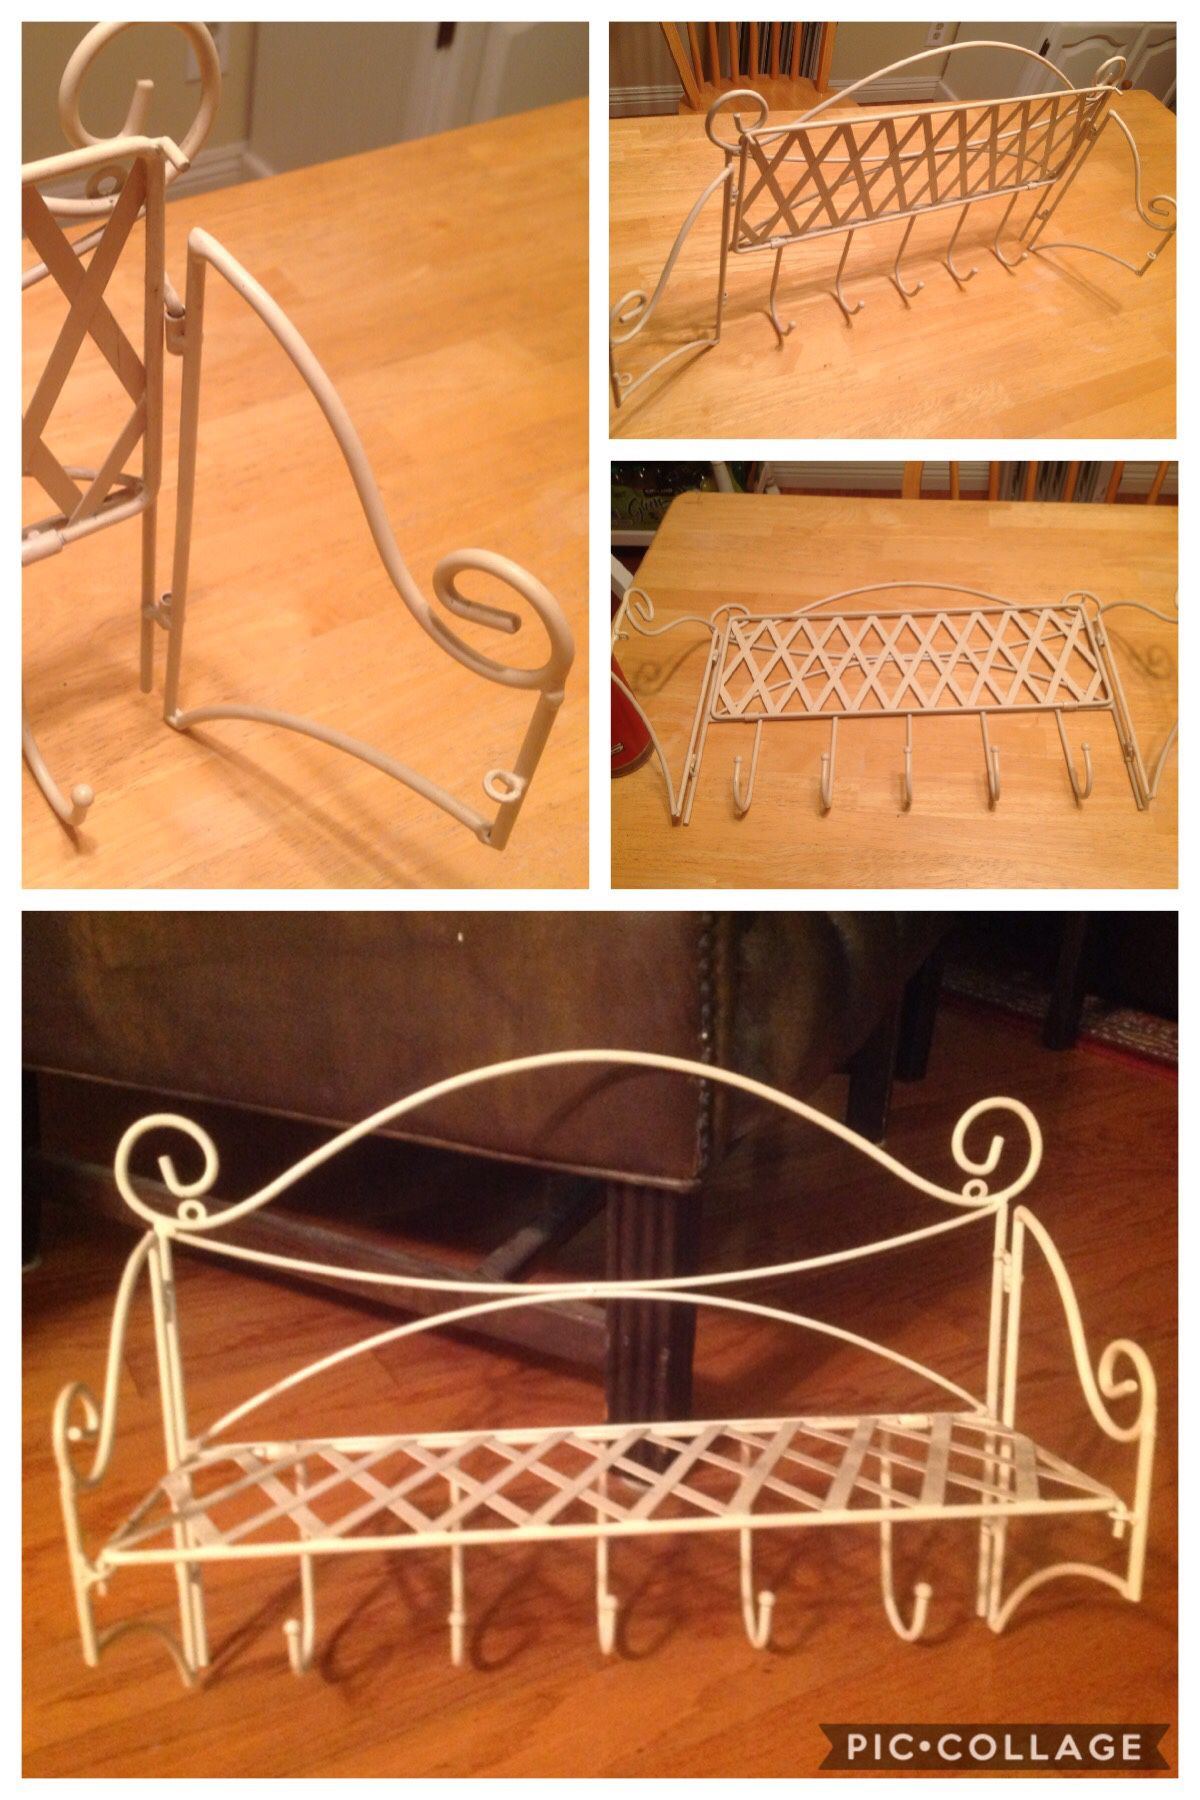 Shabby Chic-Cream Colored Mini Wire 👨‍🍳 Baker's Rack with movable Shelf and 3 hooks. Super cute! 19" wide by 17" tall X-Posted. Located in L